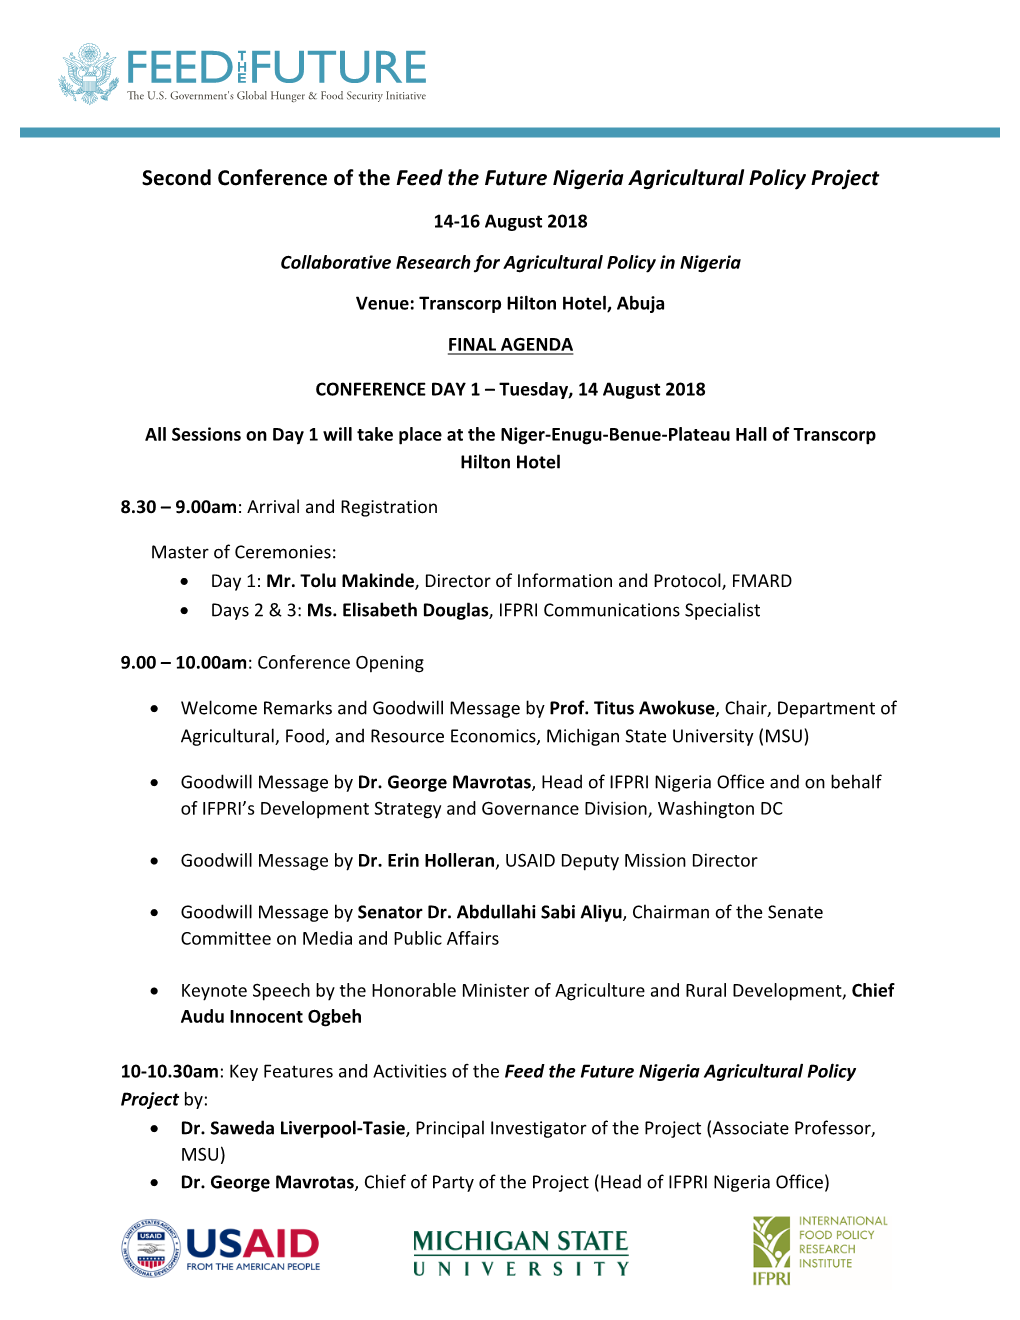 Second Conference of the Feed the Future Nigeria Agricultural Policy Project